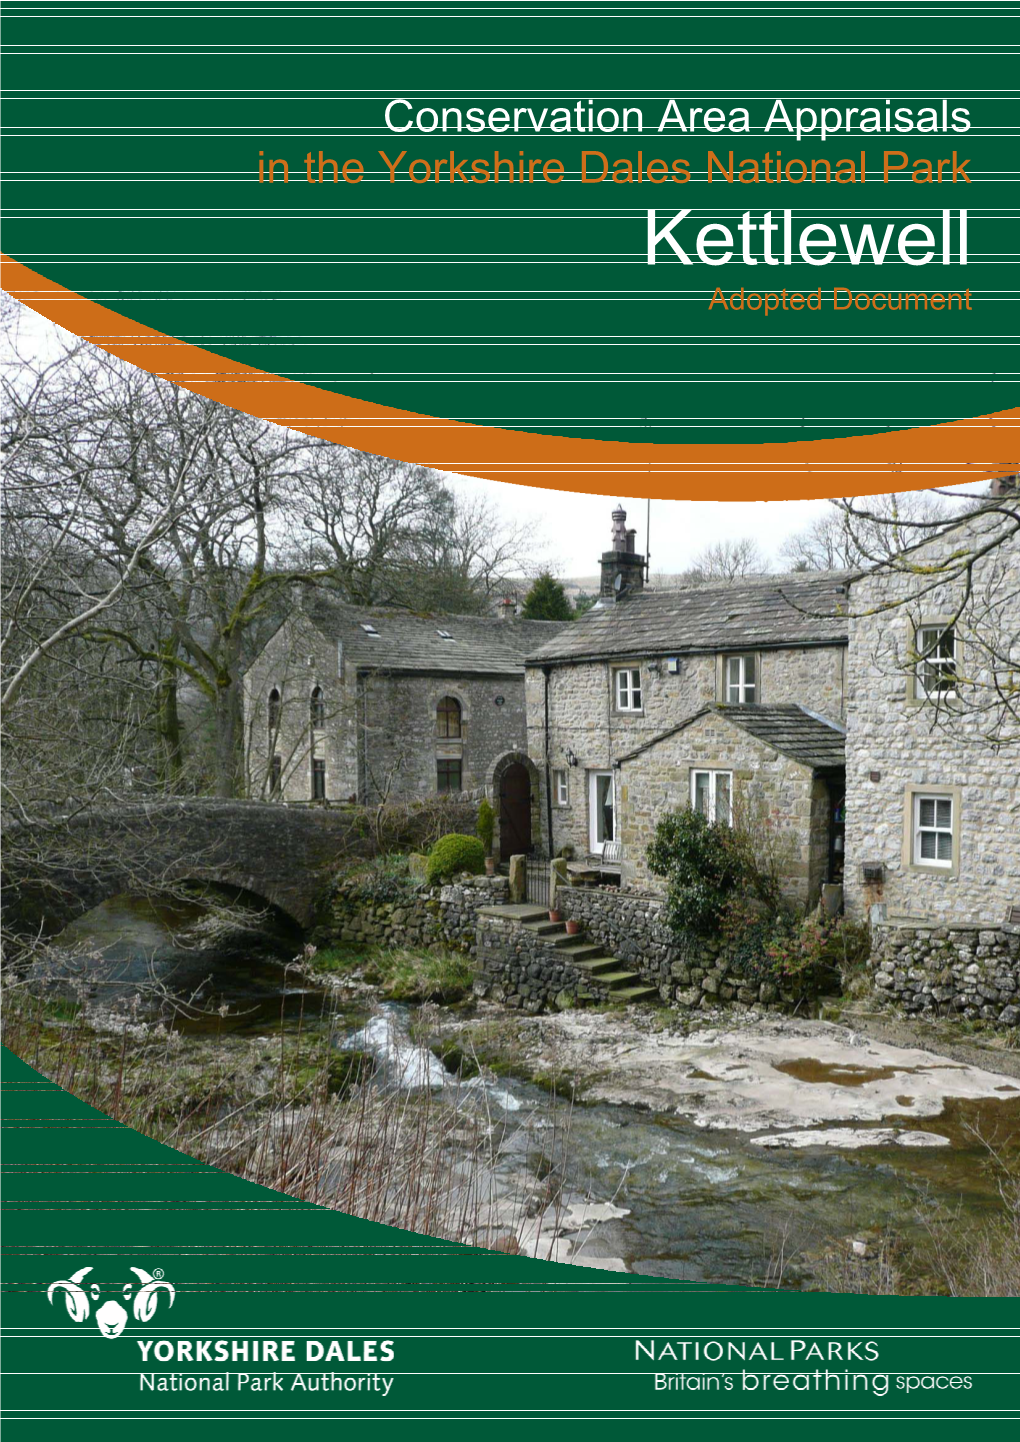 Kettlewell Conservation Area Appraisal Was Finally Adopted on 28 June 2012